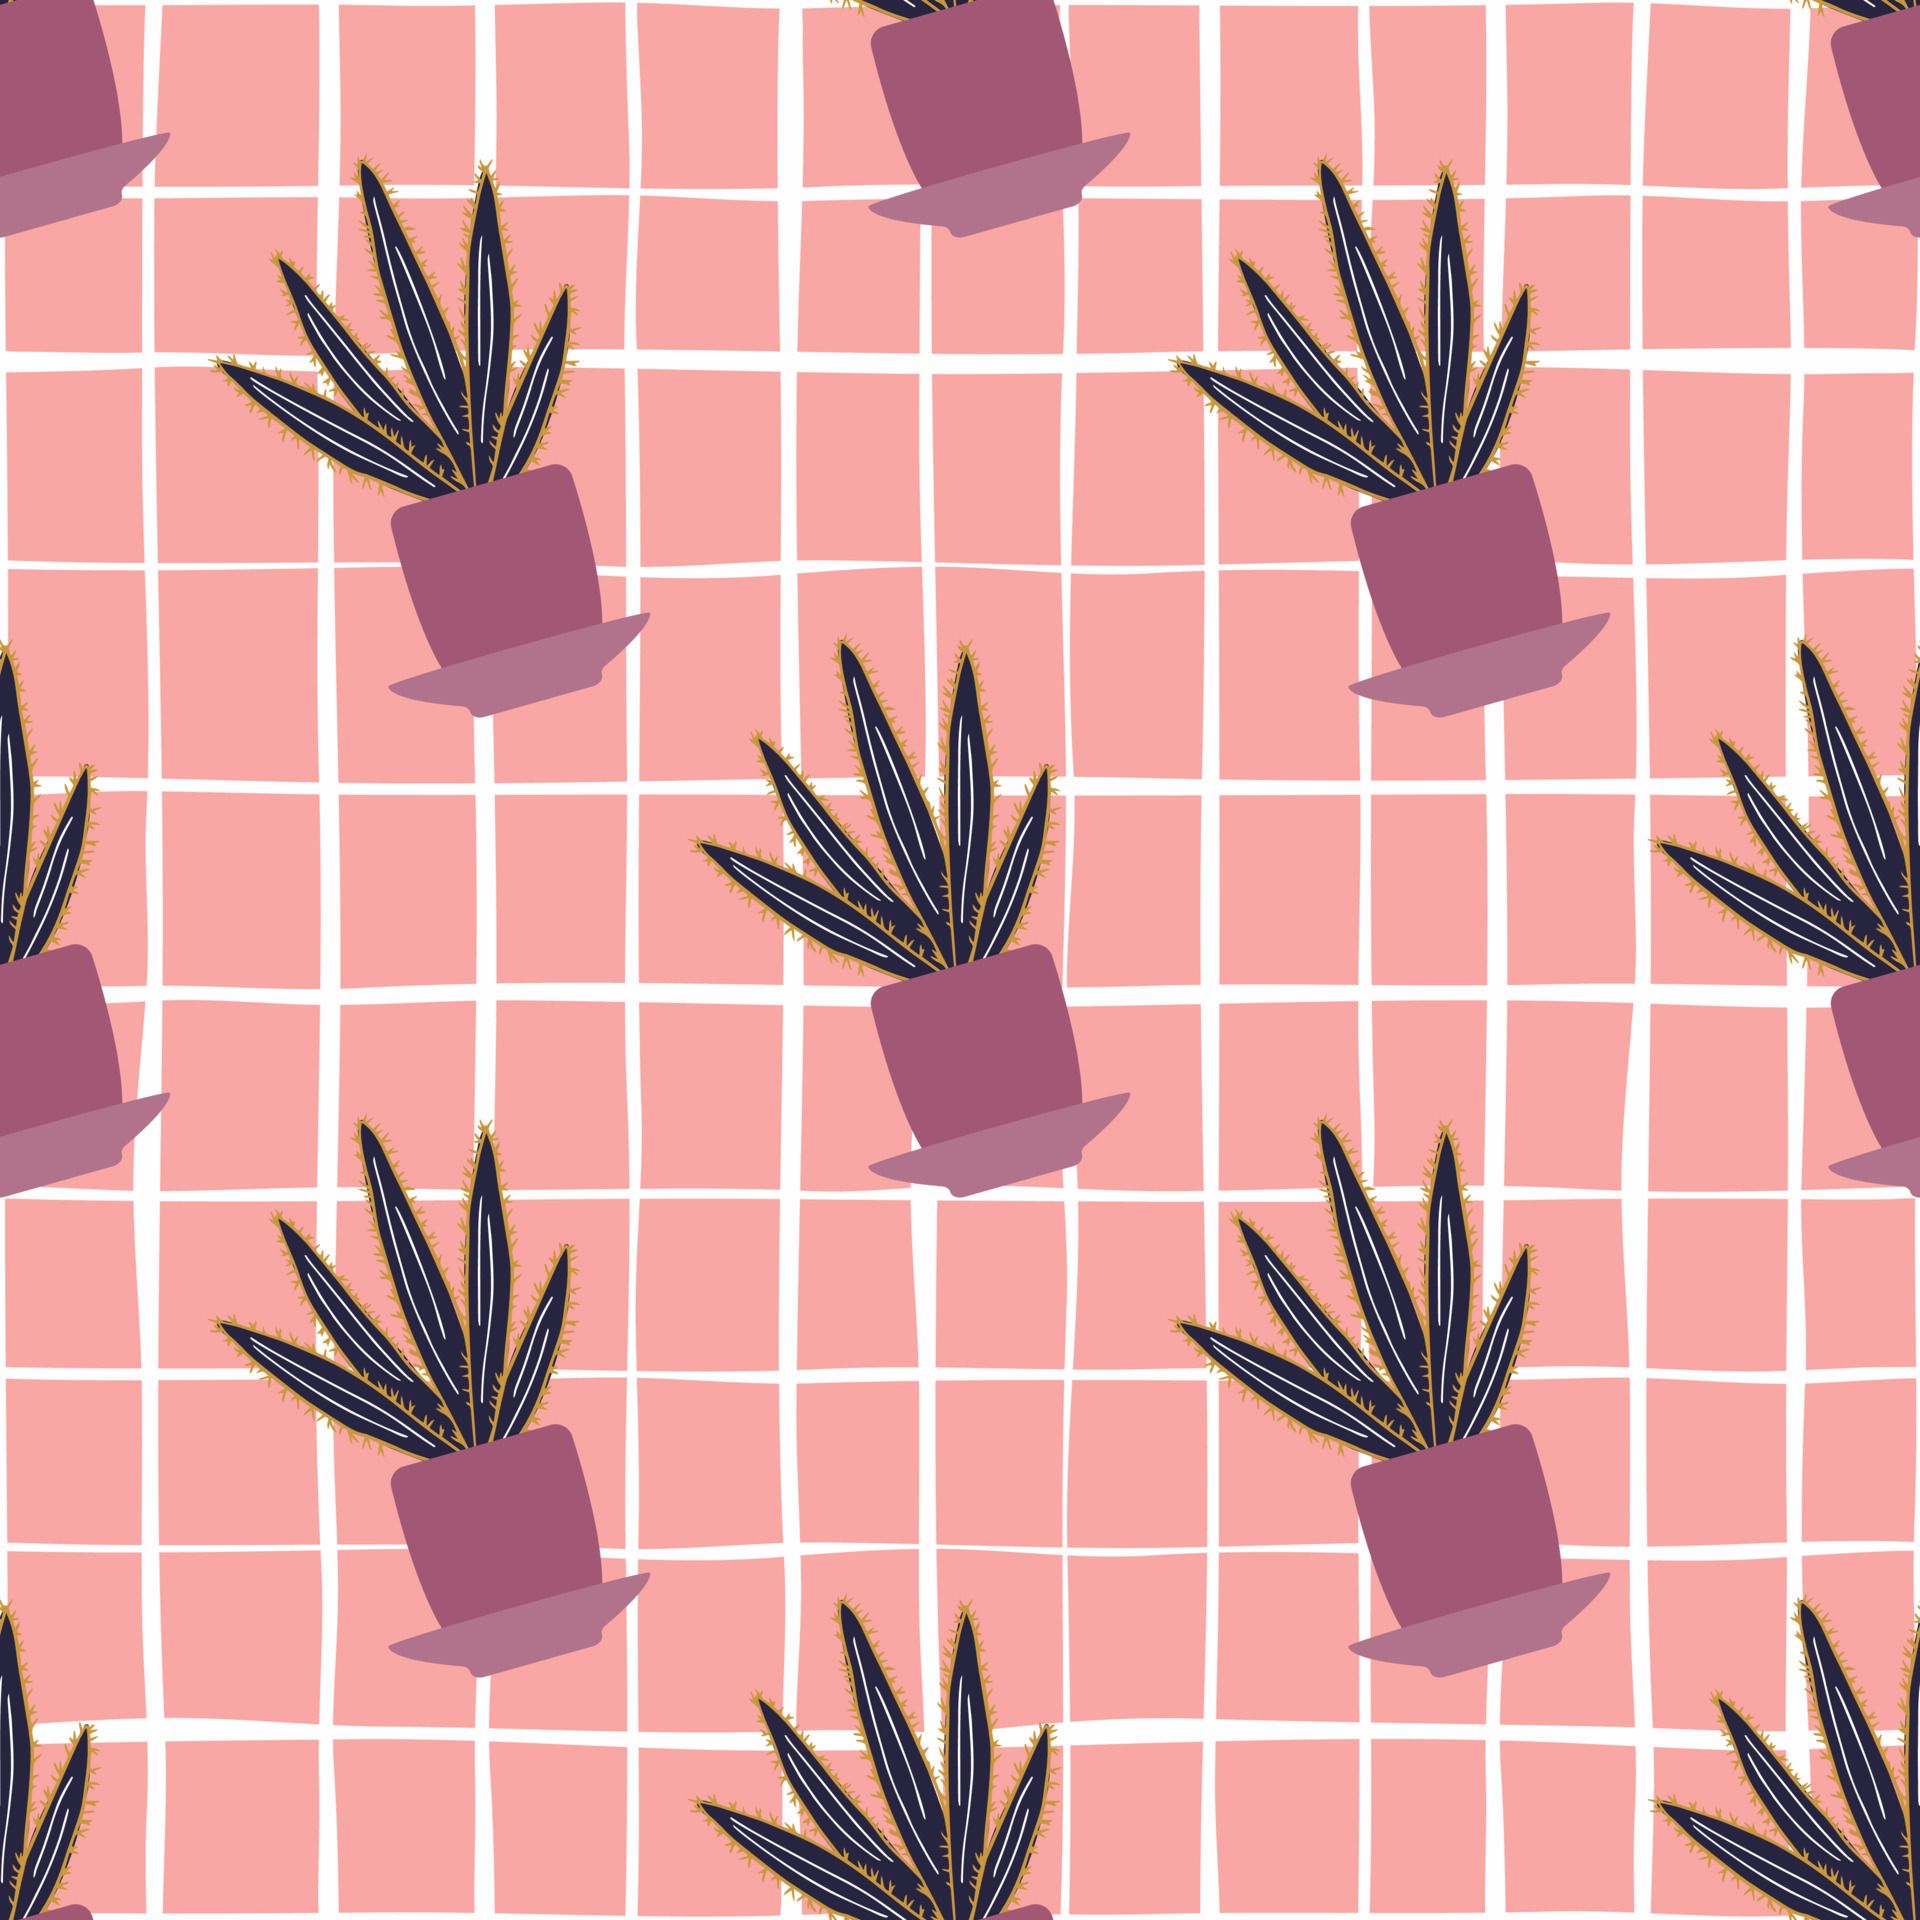 Aloe cactus in pot seamless pattern on pink stripes background. Houseplant cacti wallpaper